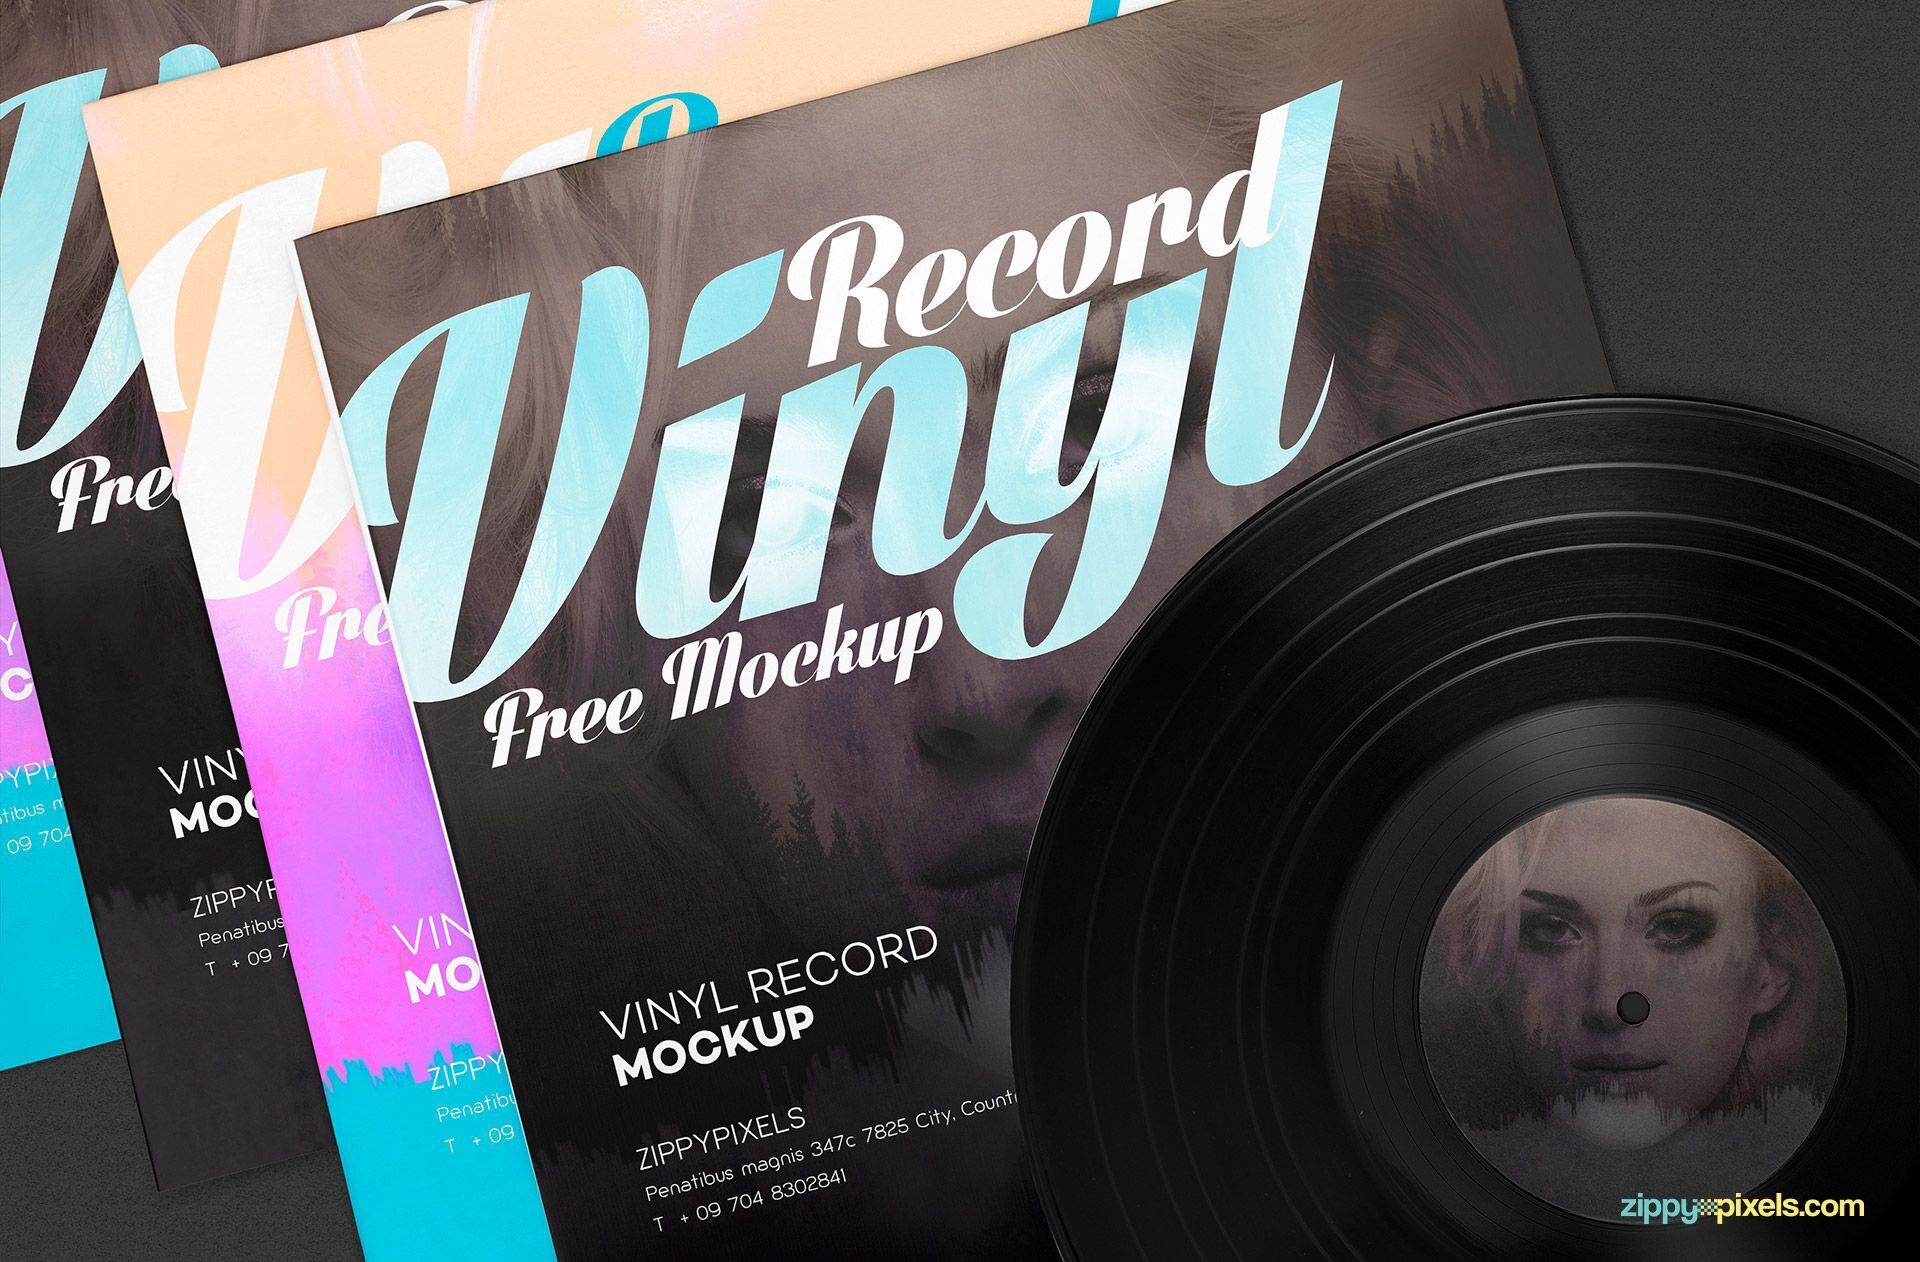 Vinyl Record And Its Cover Mockup FREE PSD